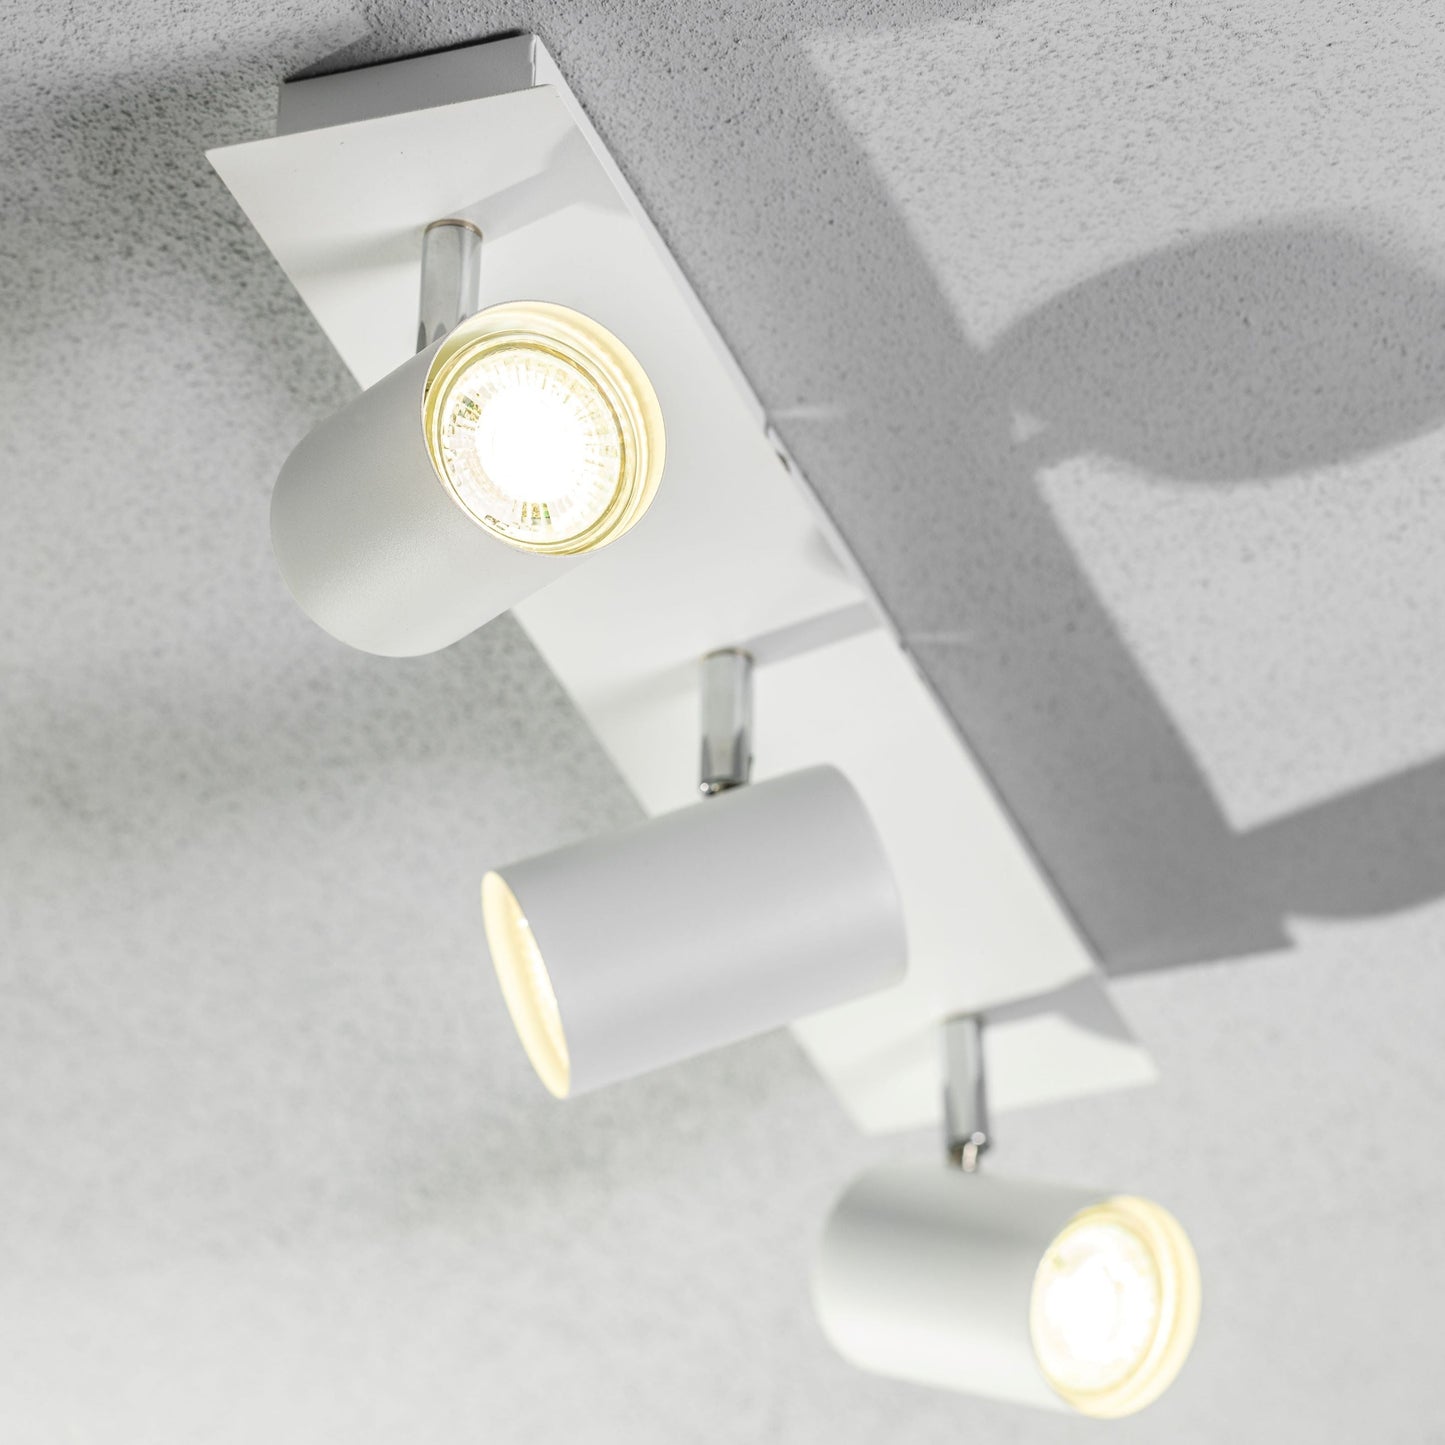 Add an industrial style to your home with the VENETO  spotlight light finished in white. The lamp is also ideal for task lighting due to the adjustable heads providing a focused beam. The simplistic design of this light fitting makes it suitable for all interior styles.